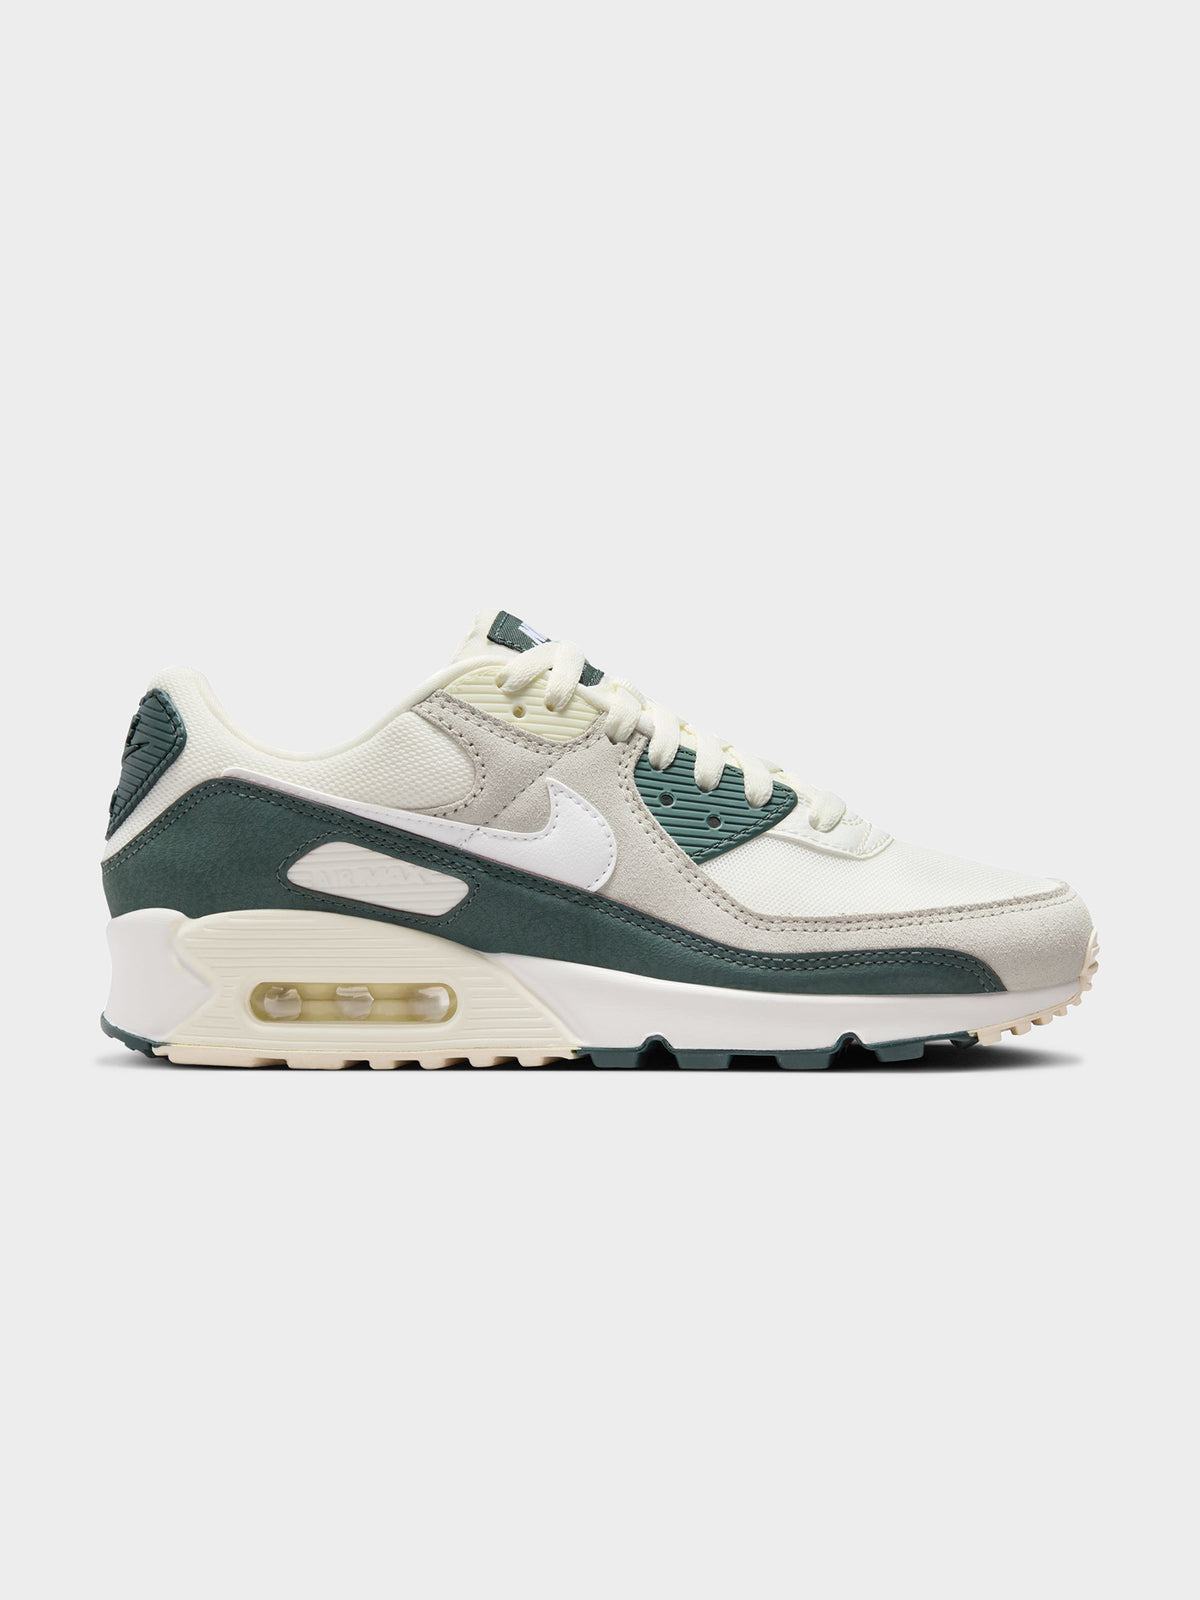 Womens Air Max 90 Sneakers in Sail, White, Green &amp; Coconut Milk